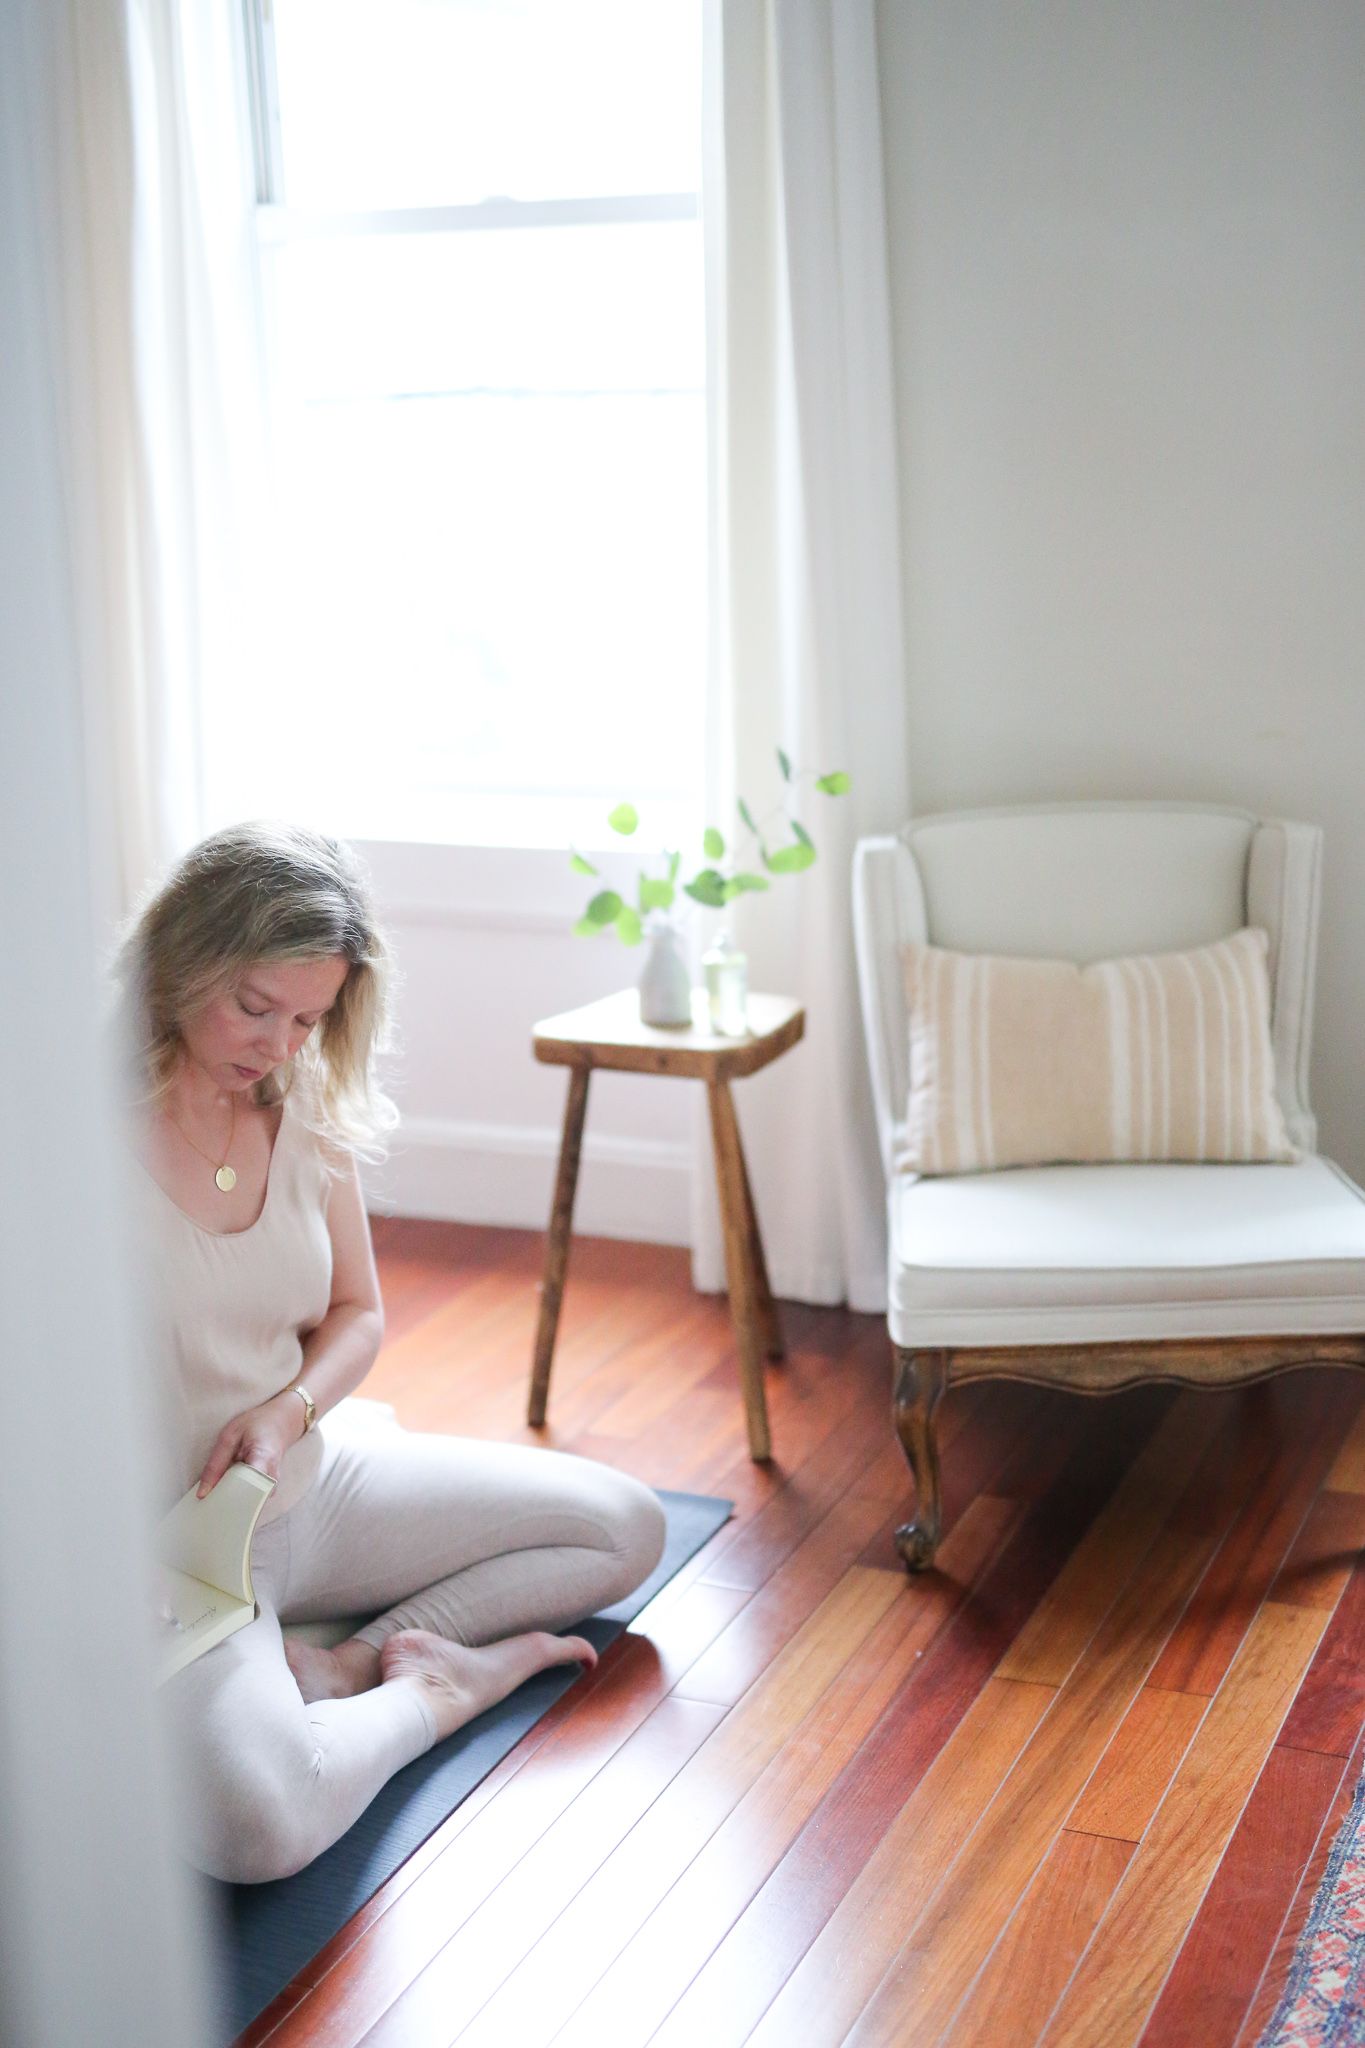 woman journaling wearing beige sitting in cross-legged seat in room with small chair, pillow, stool with flowers